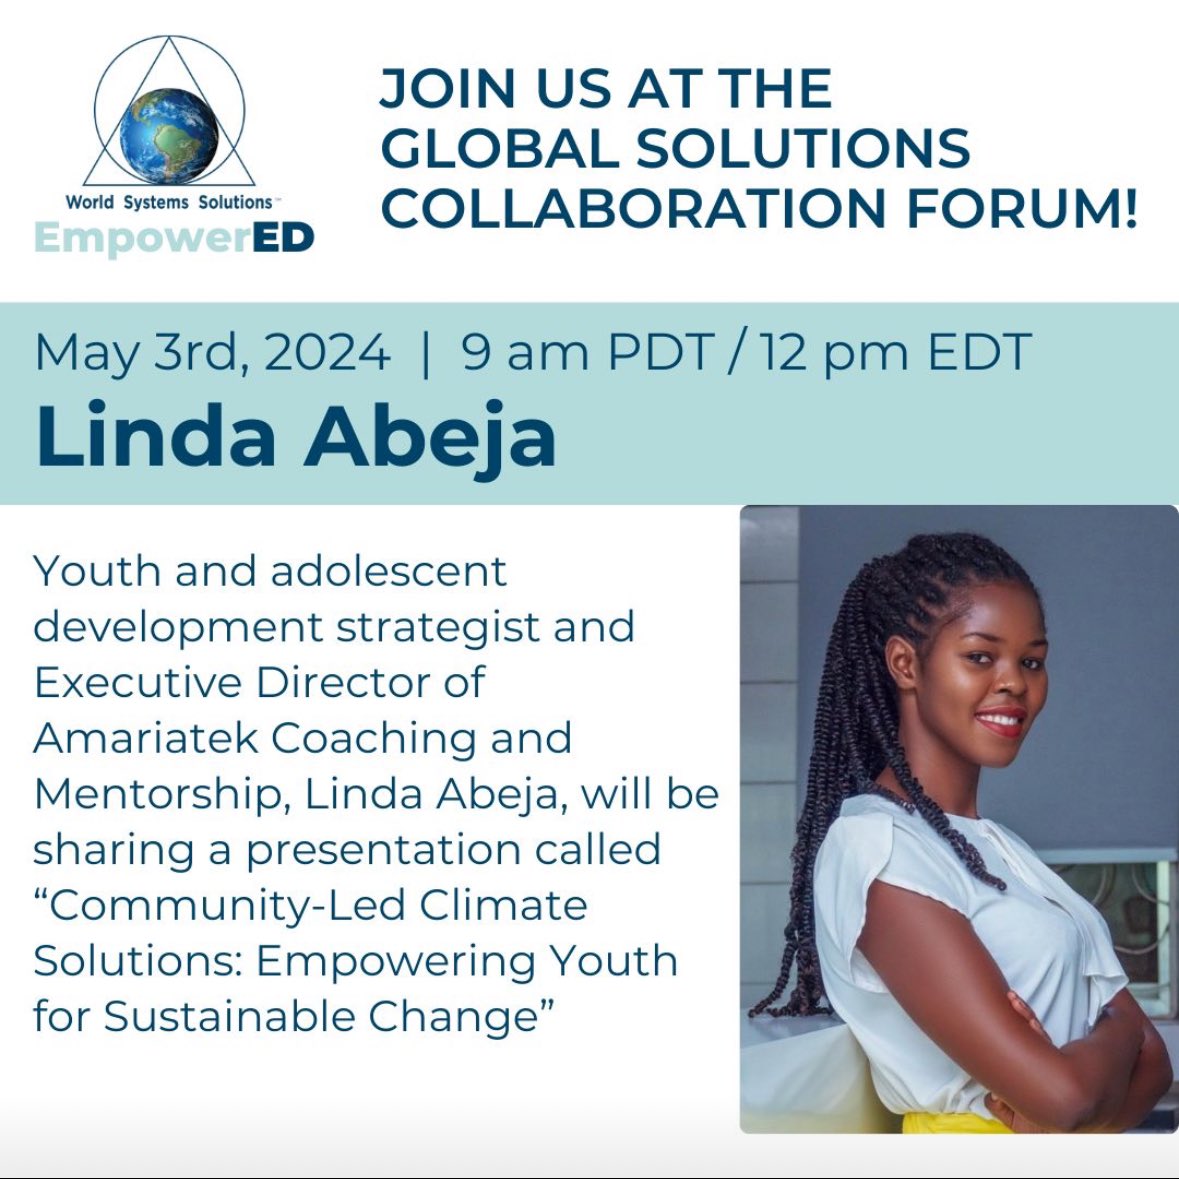 🌍 Ready to inspire change? Join me at the Global Solutions Forum to empower youth with community-led climate initiatives. 🌱 Let’s share stories of impact and support our future leaders! #ClimateAction #YouthEmpowerment 🔗 Zoom link here: lnkd.in/g6Nu74Cr